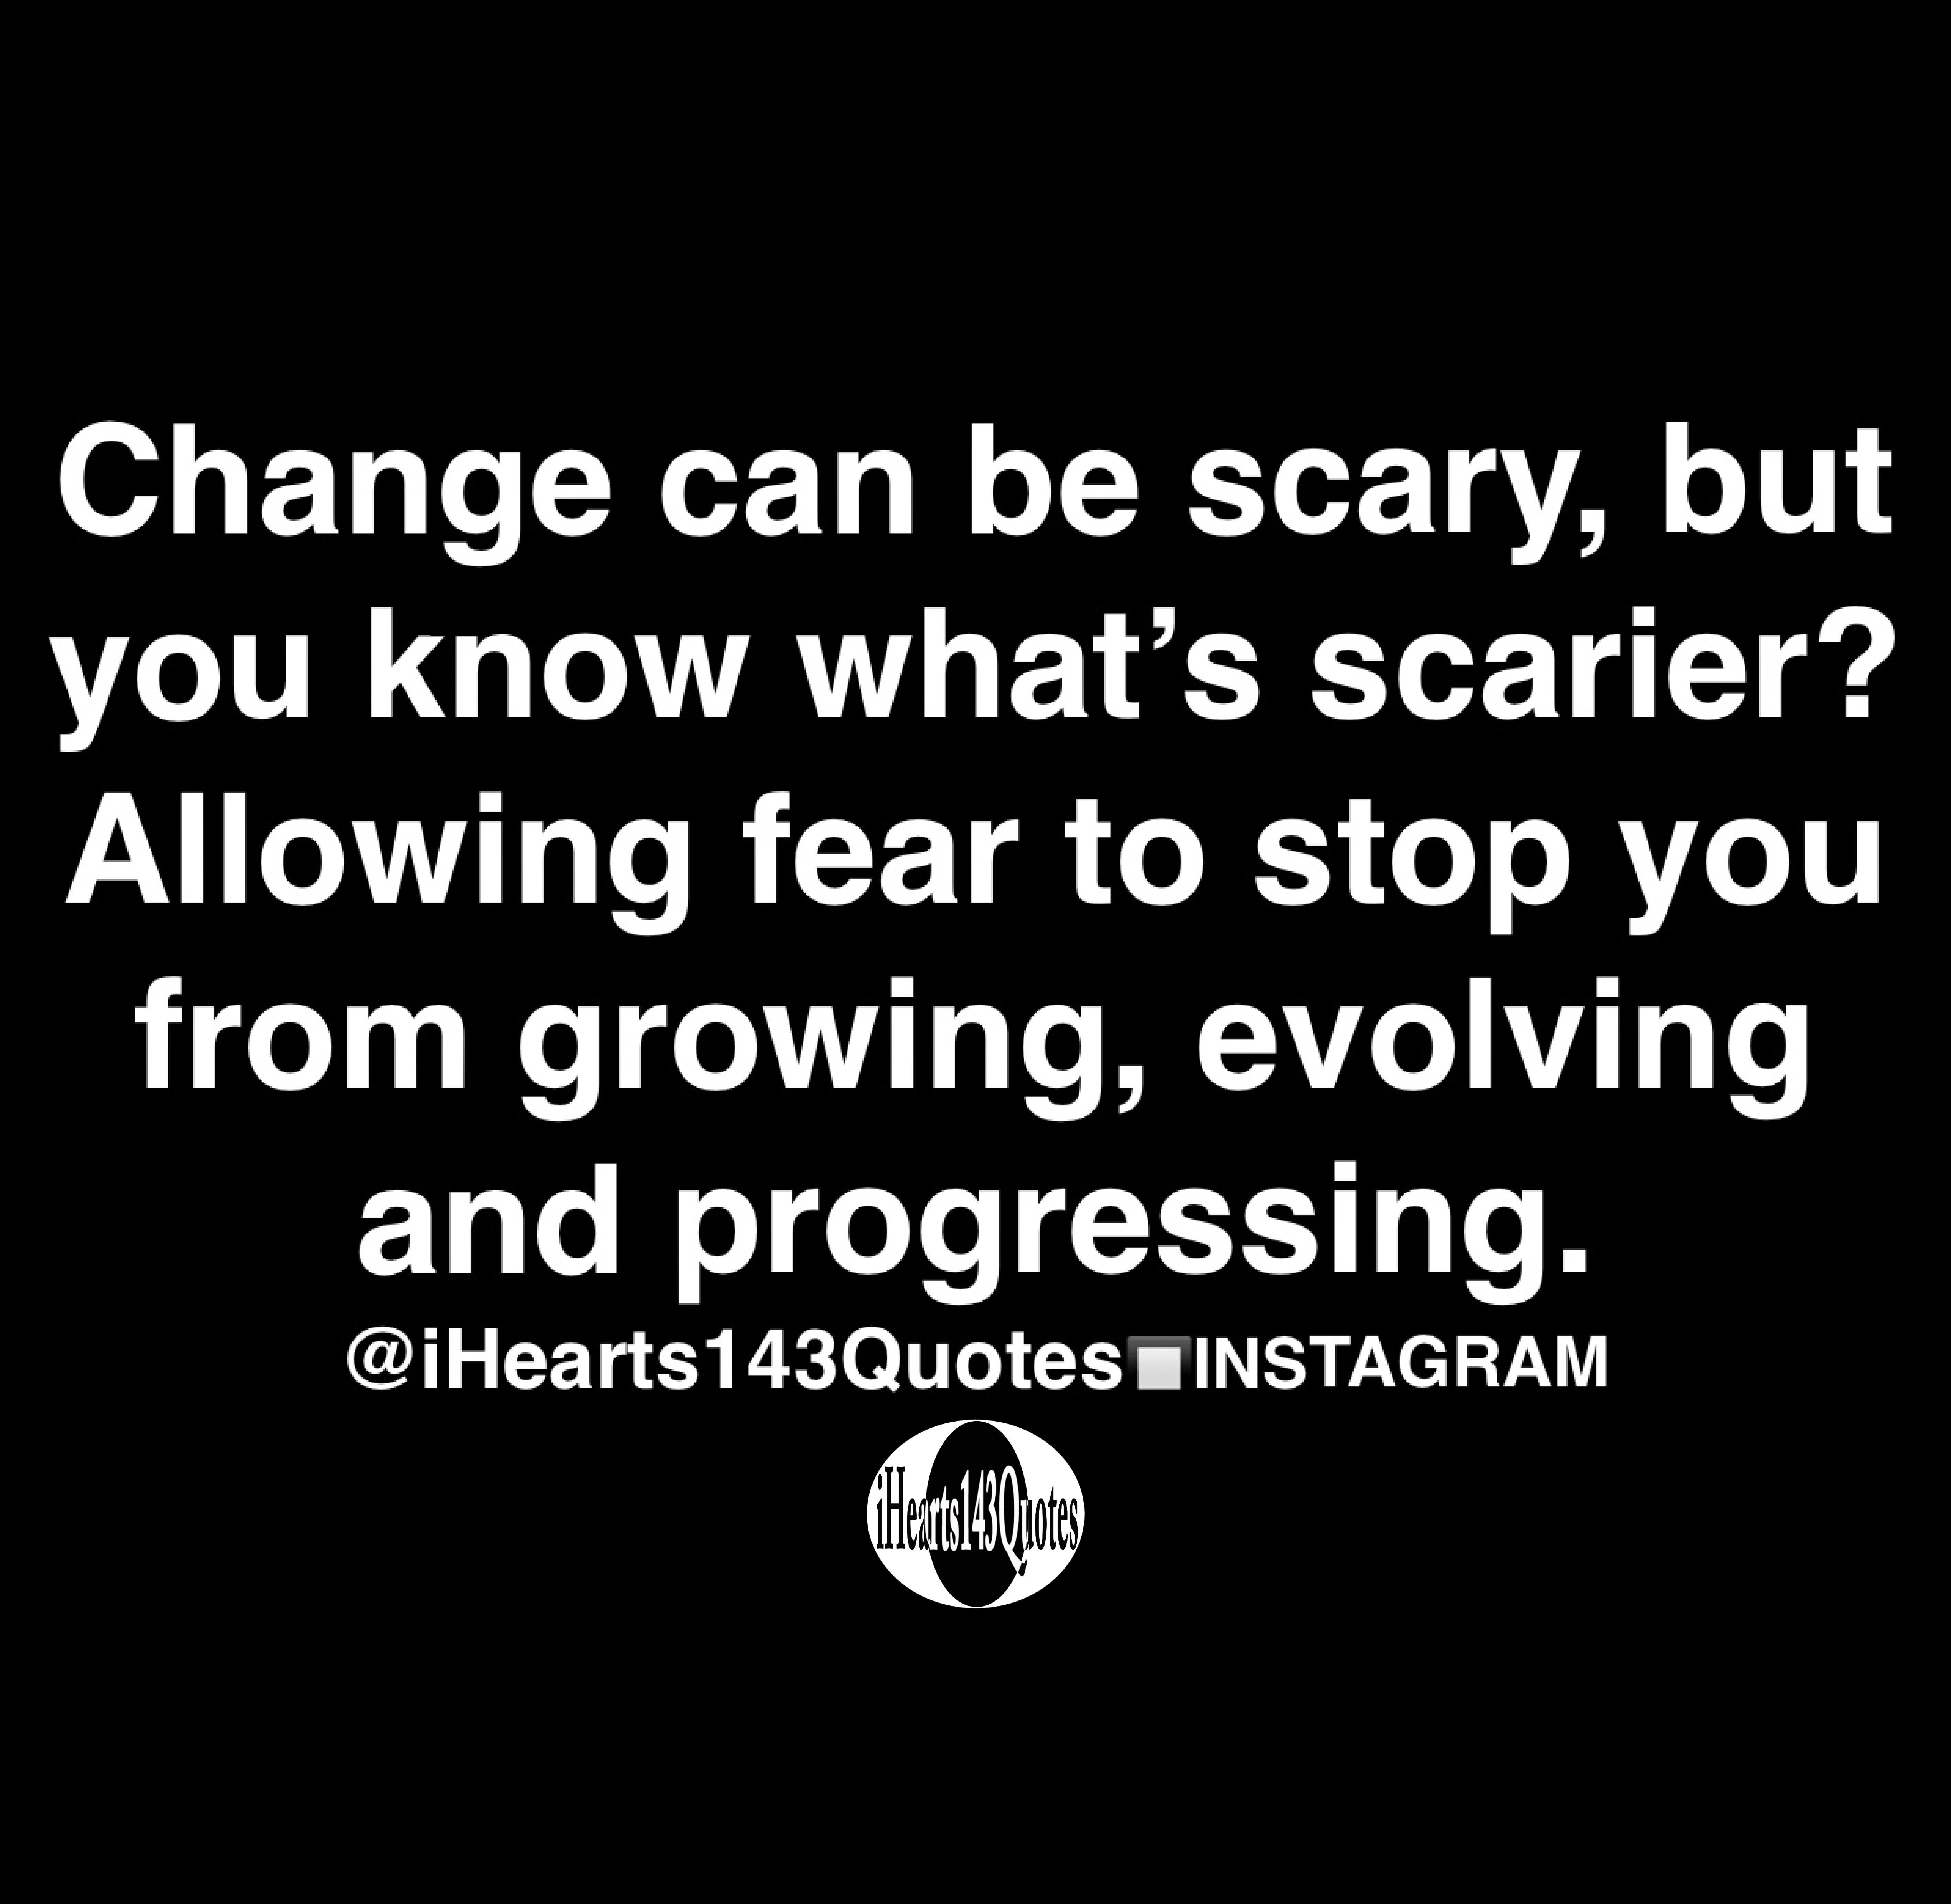 Change can be scary, but you know what's scarier? Allowing fear to stop ...